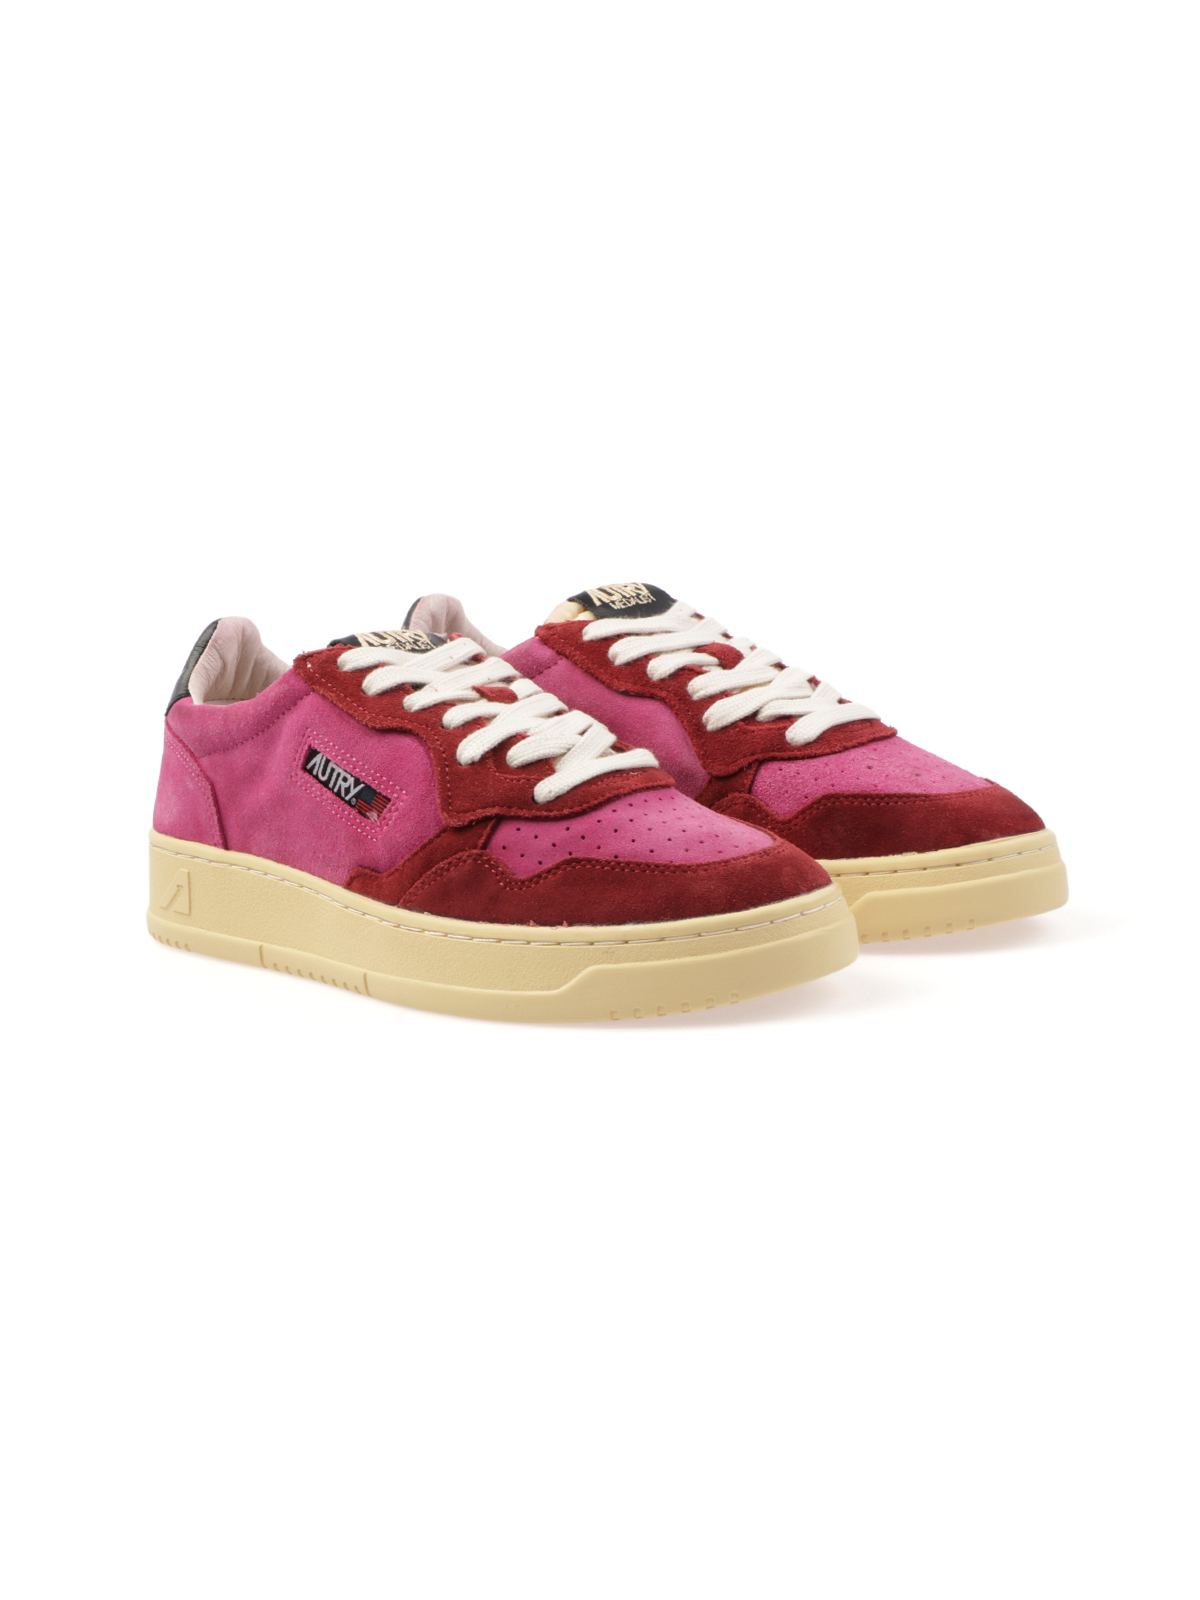 Picture of AUTRY | Women's Medalist Low Suede Sneakers